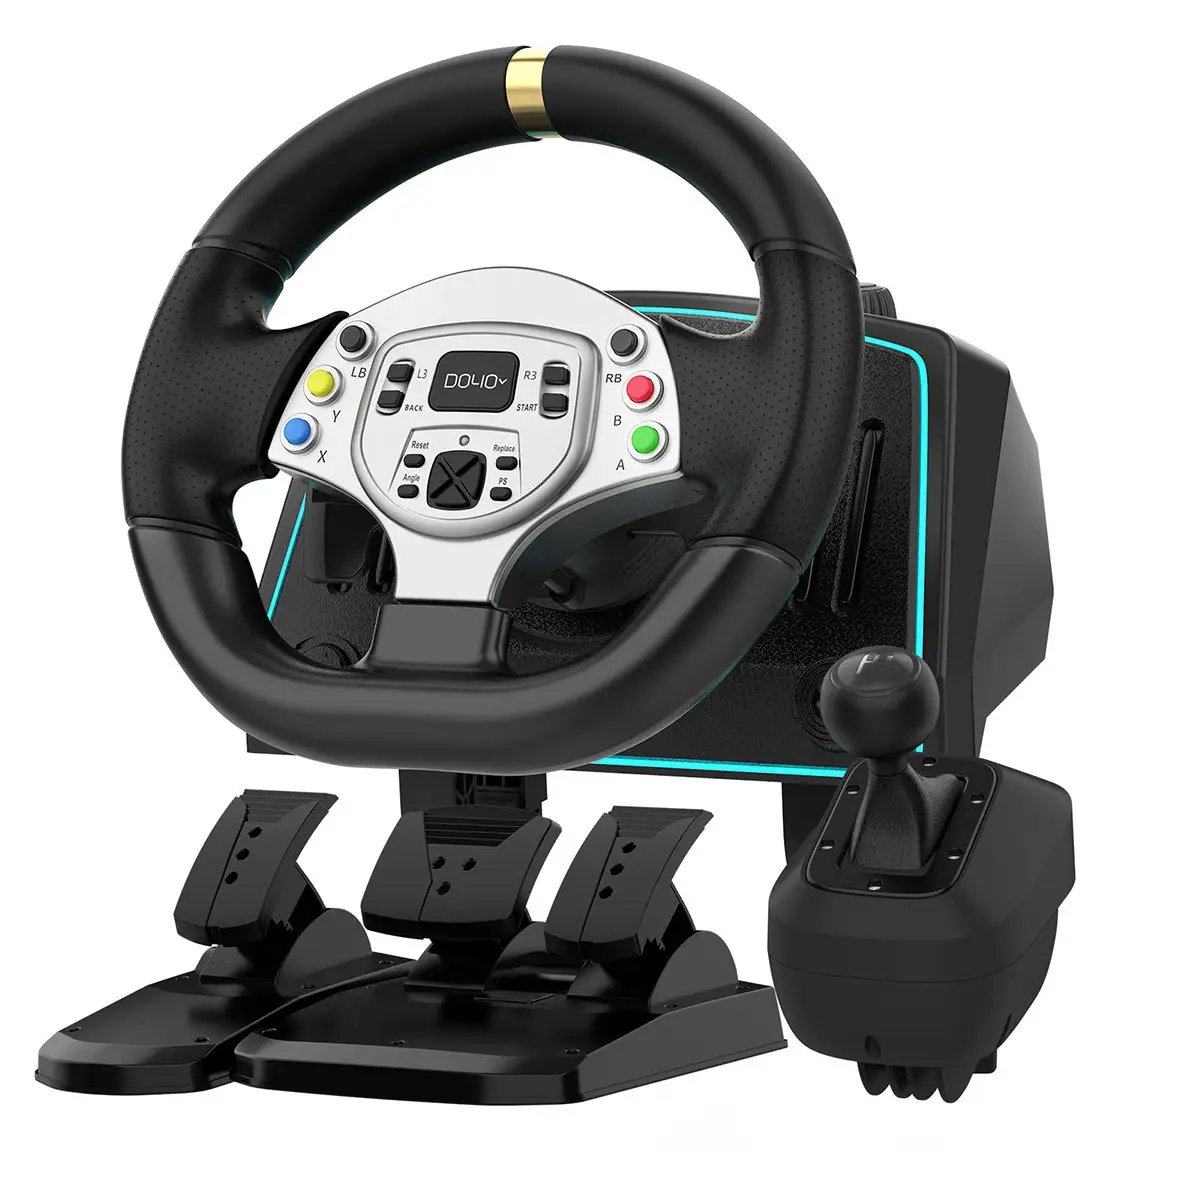 270 Degree Four in one Game Steering Wheel S809 gear shifter chair with steering wheel and pedals full set-up